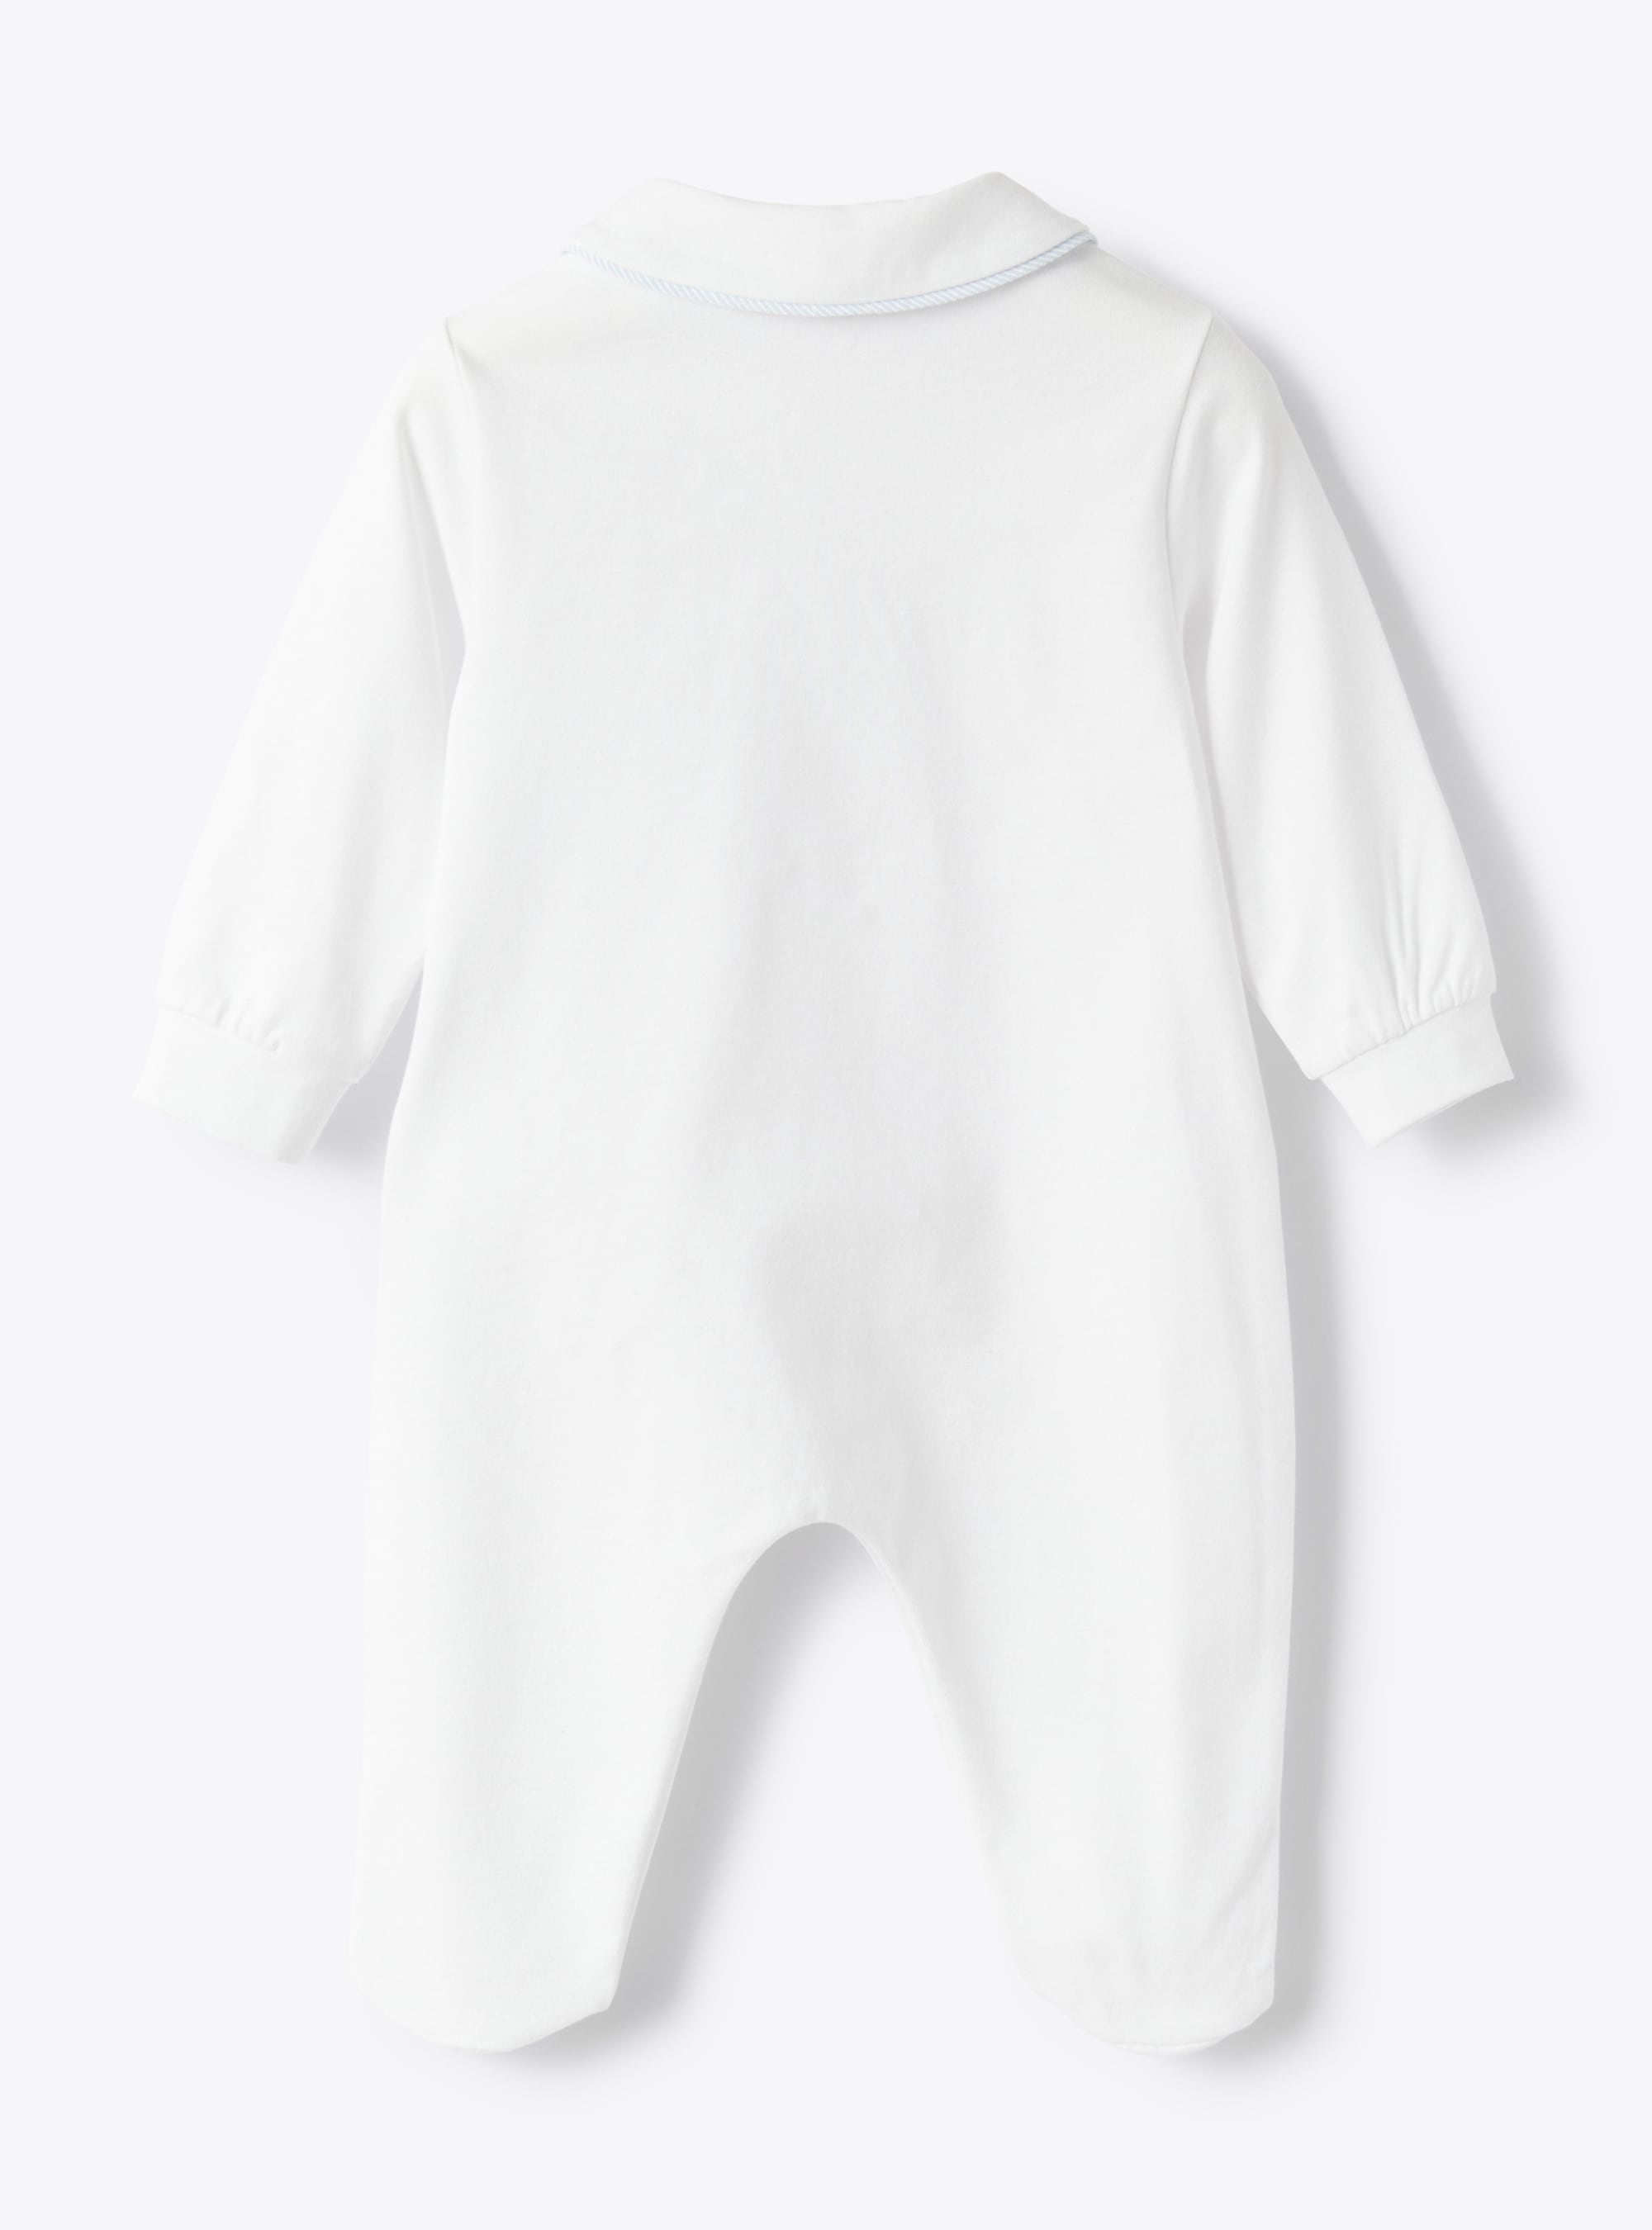 Jersey sleepsuit with bear picture - White | Il Gufo